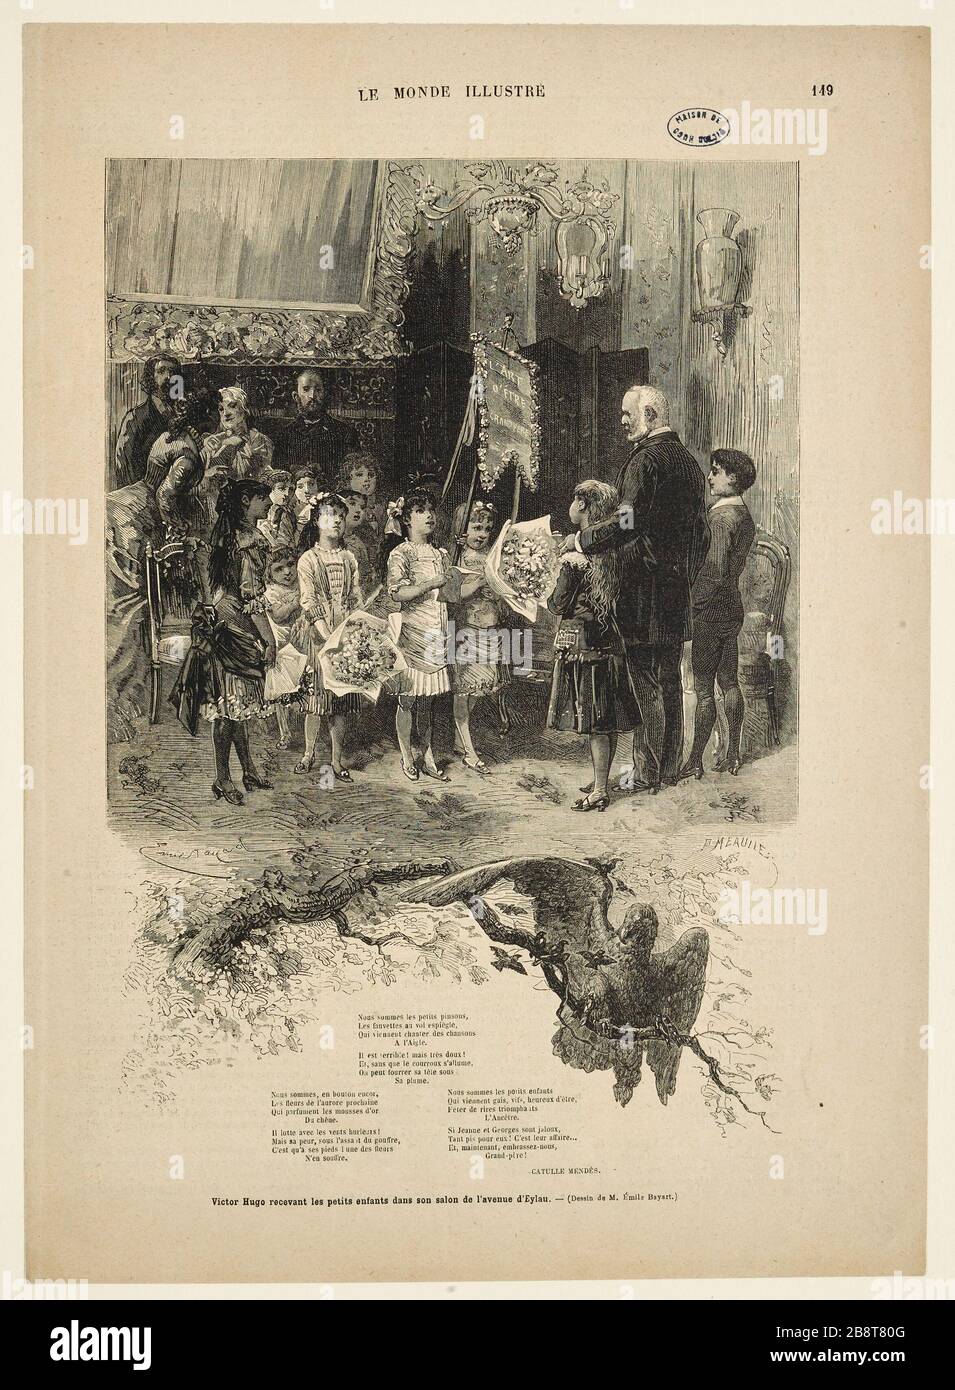 Victor Hugo receiving small children in the living room of the Avenue d'Eylau. Stock Photo